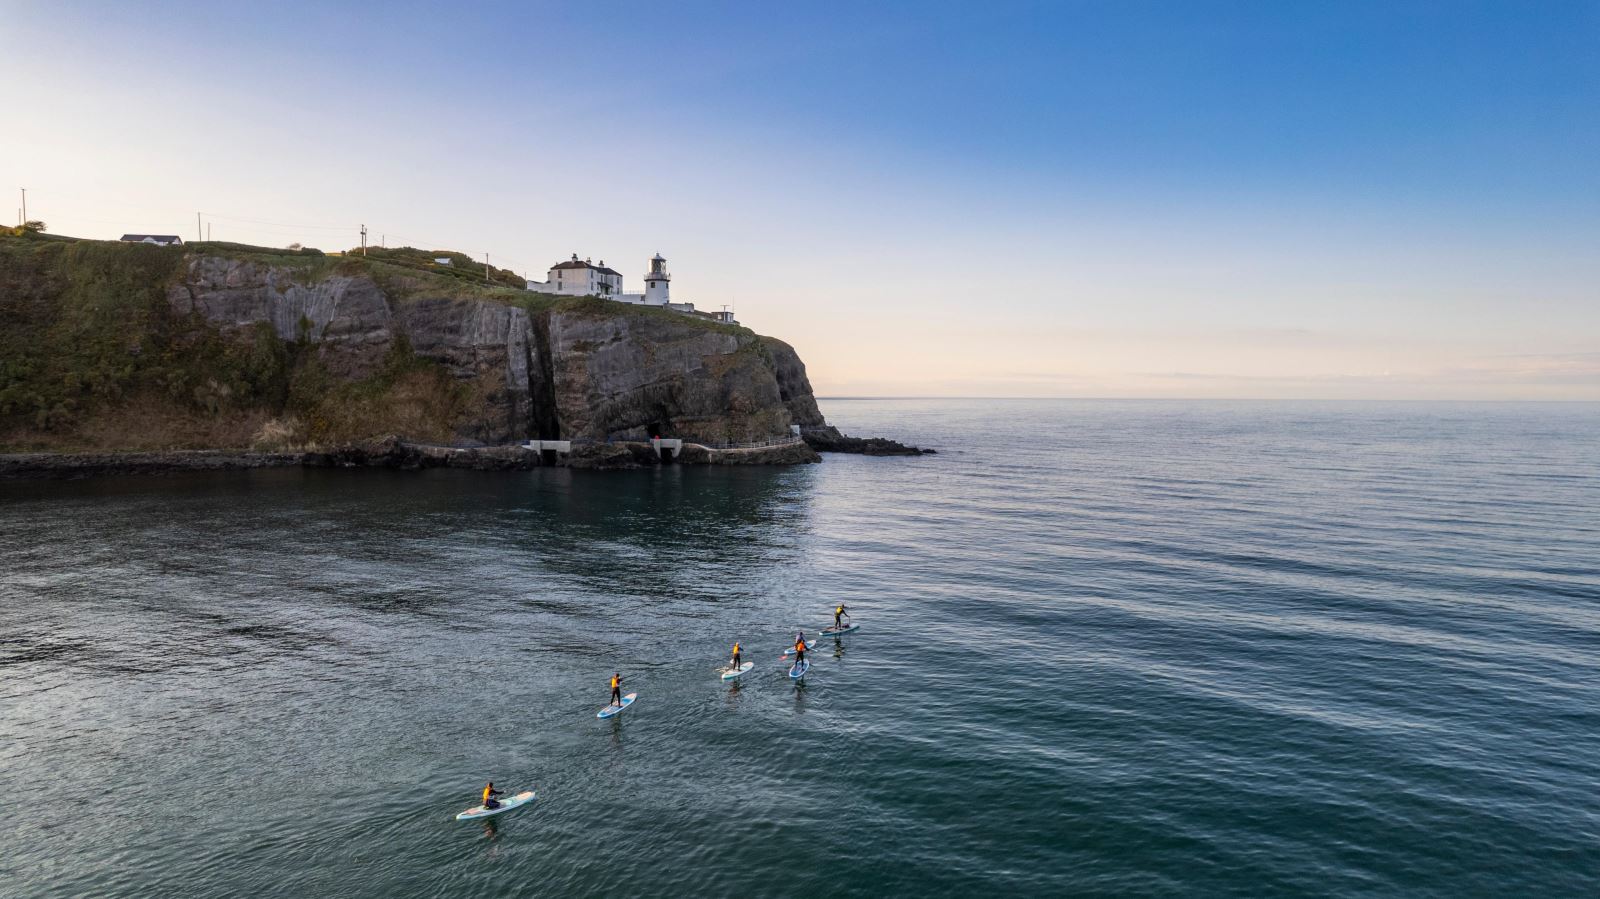 Group of paddleboarders going along coast with Blackhead Lighthouse in background